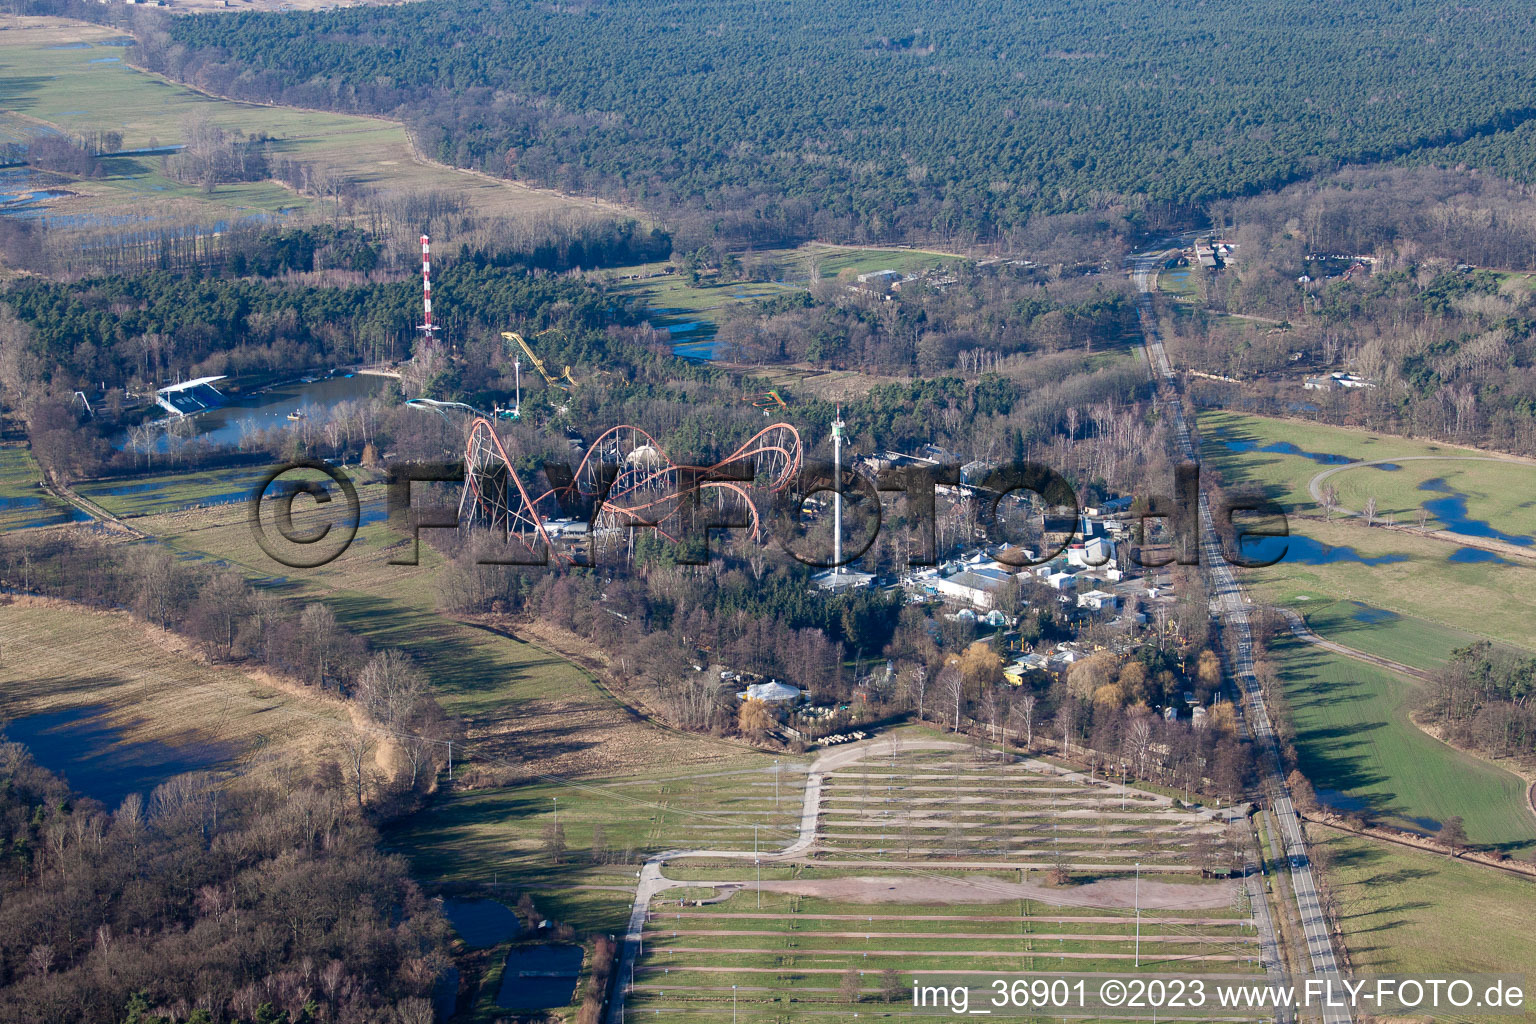 Holiday Park in Haßloch in the state Rhineland-Palatinate, Germany seen from above